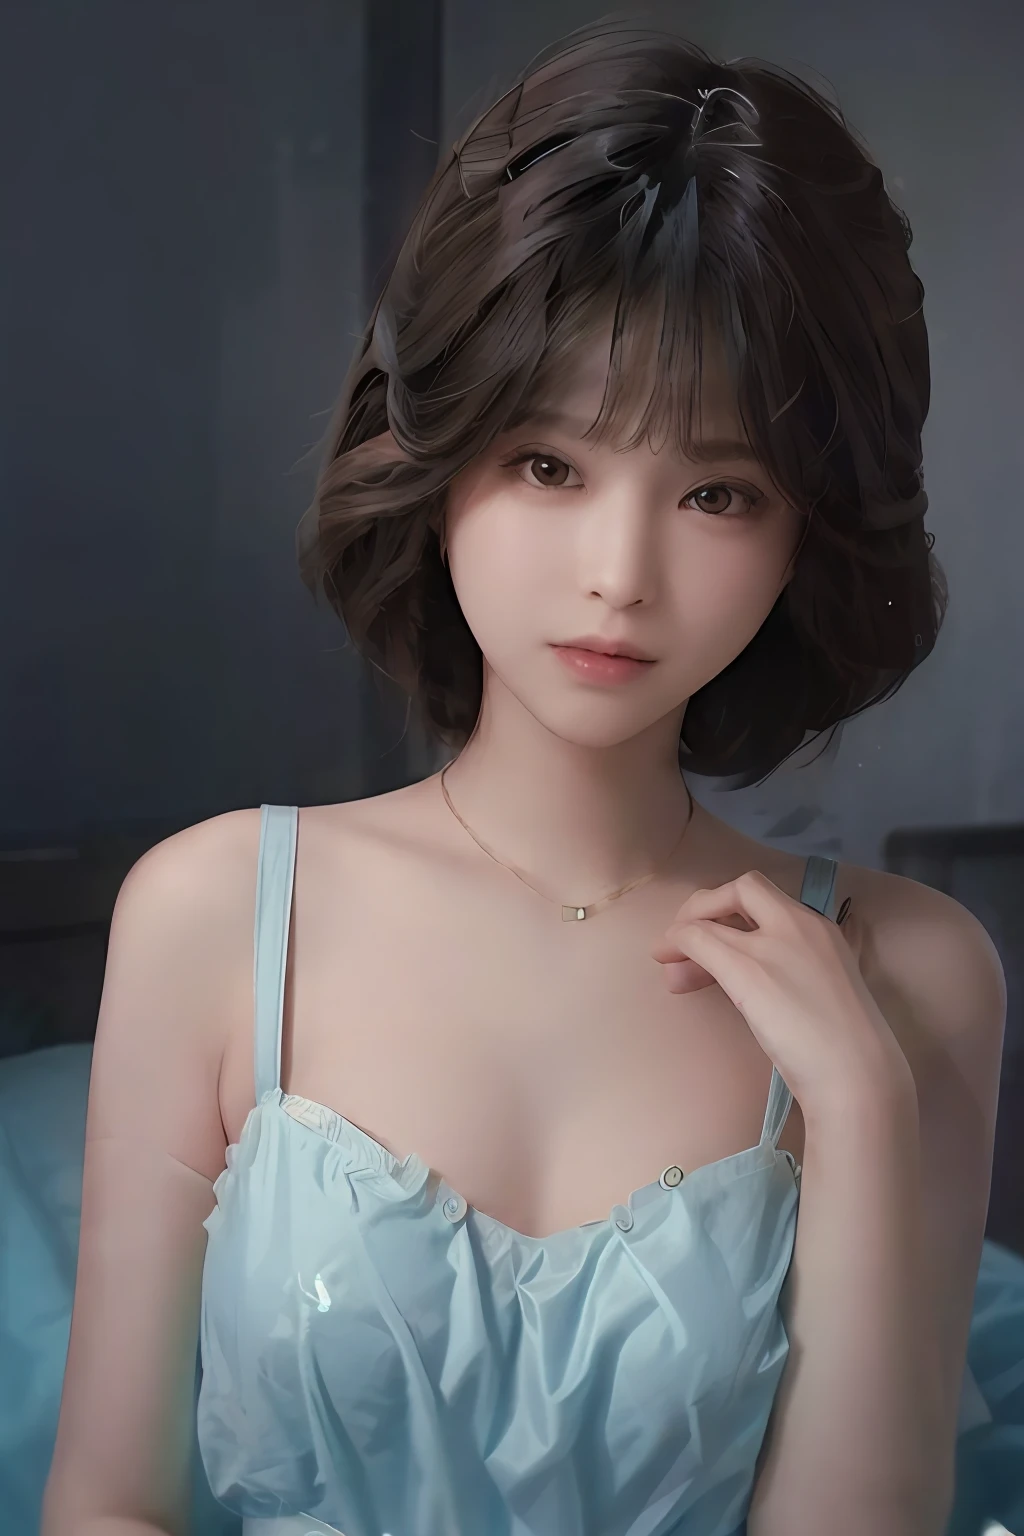 (masuter piece:1.3)、(8k、Photorealsitic、RAW Photography、top-quality: 1.4)、(1girl)、beautiful countenance、(lifelike face)、(A dark-haired、short-hair:1.3)、Beautiful hairstyle、realisticeyes、Beautiful details、（real looking skin）、Beautiful skins、（Sweaters）、absurderes、enticing、超A high resolution、A hyper-realistic、high-detail、the golden ratio、swim wears、gravure、